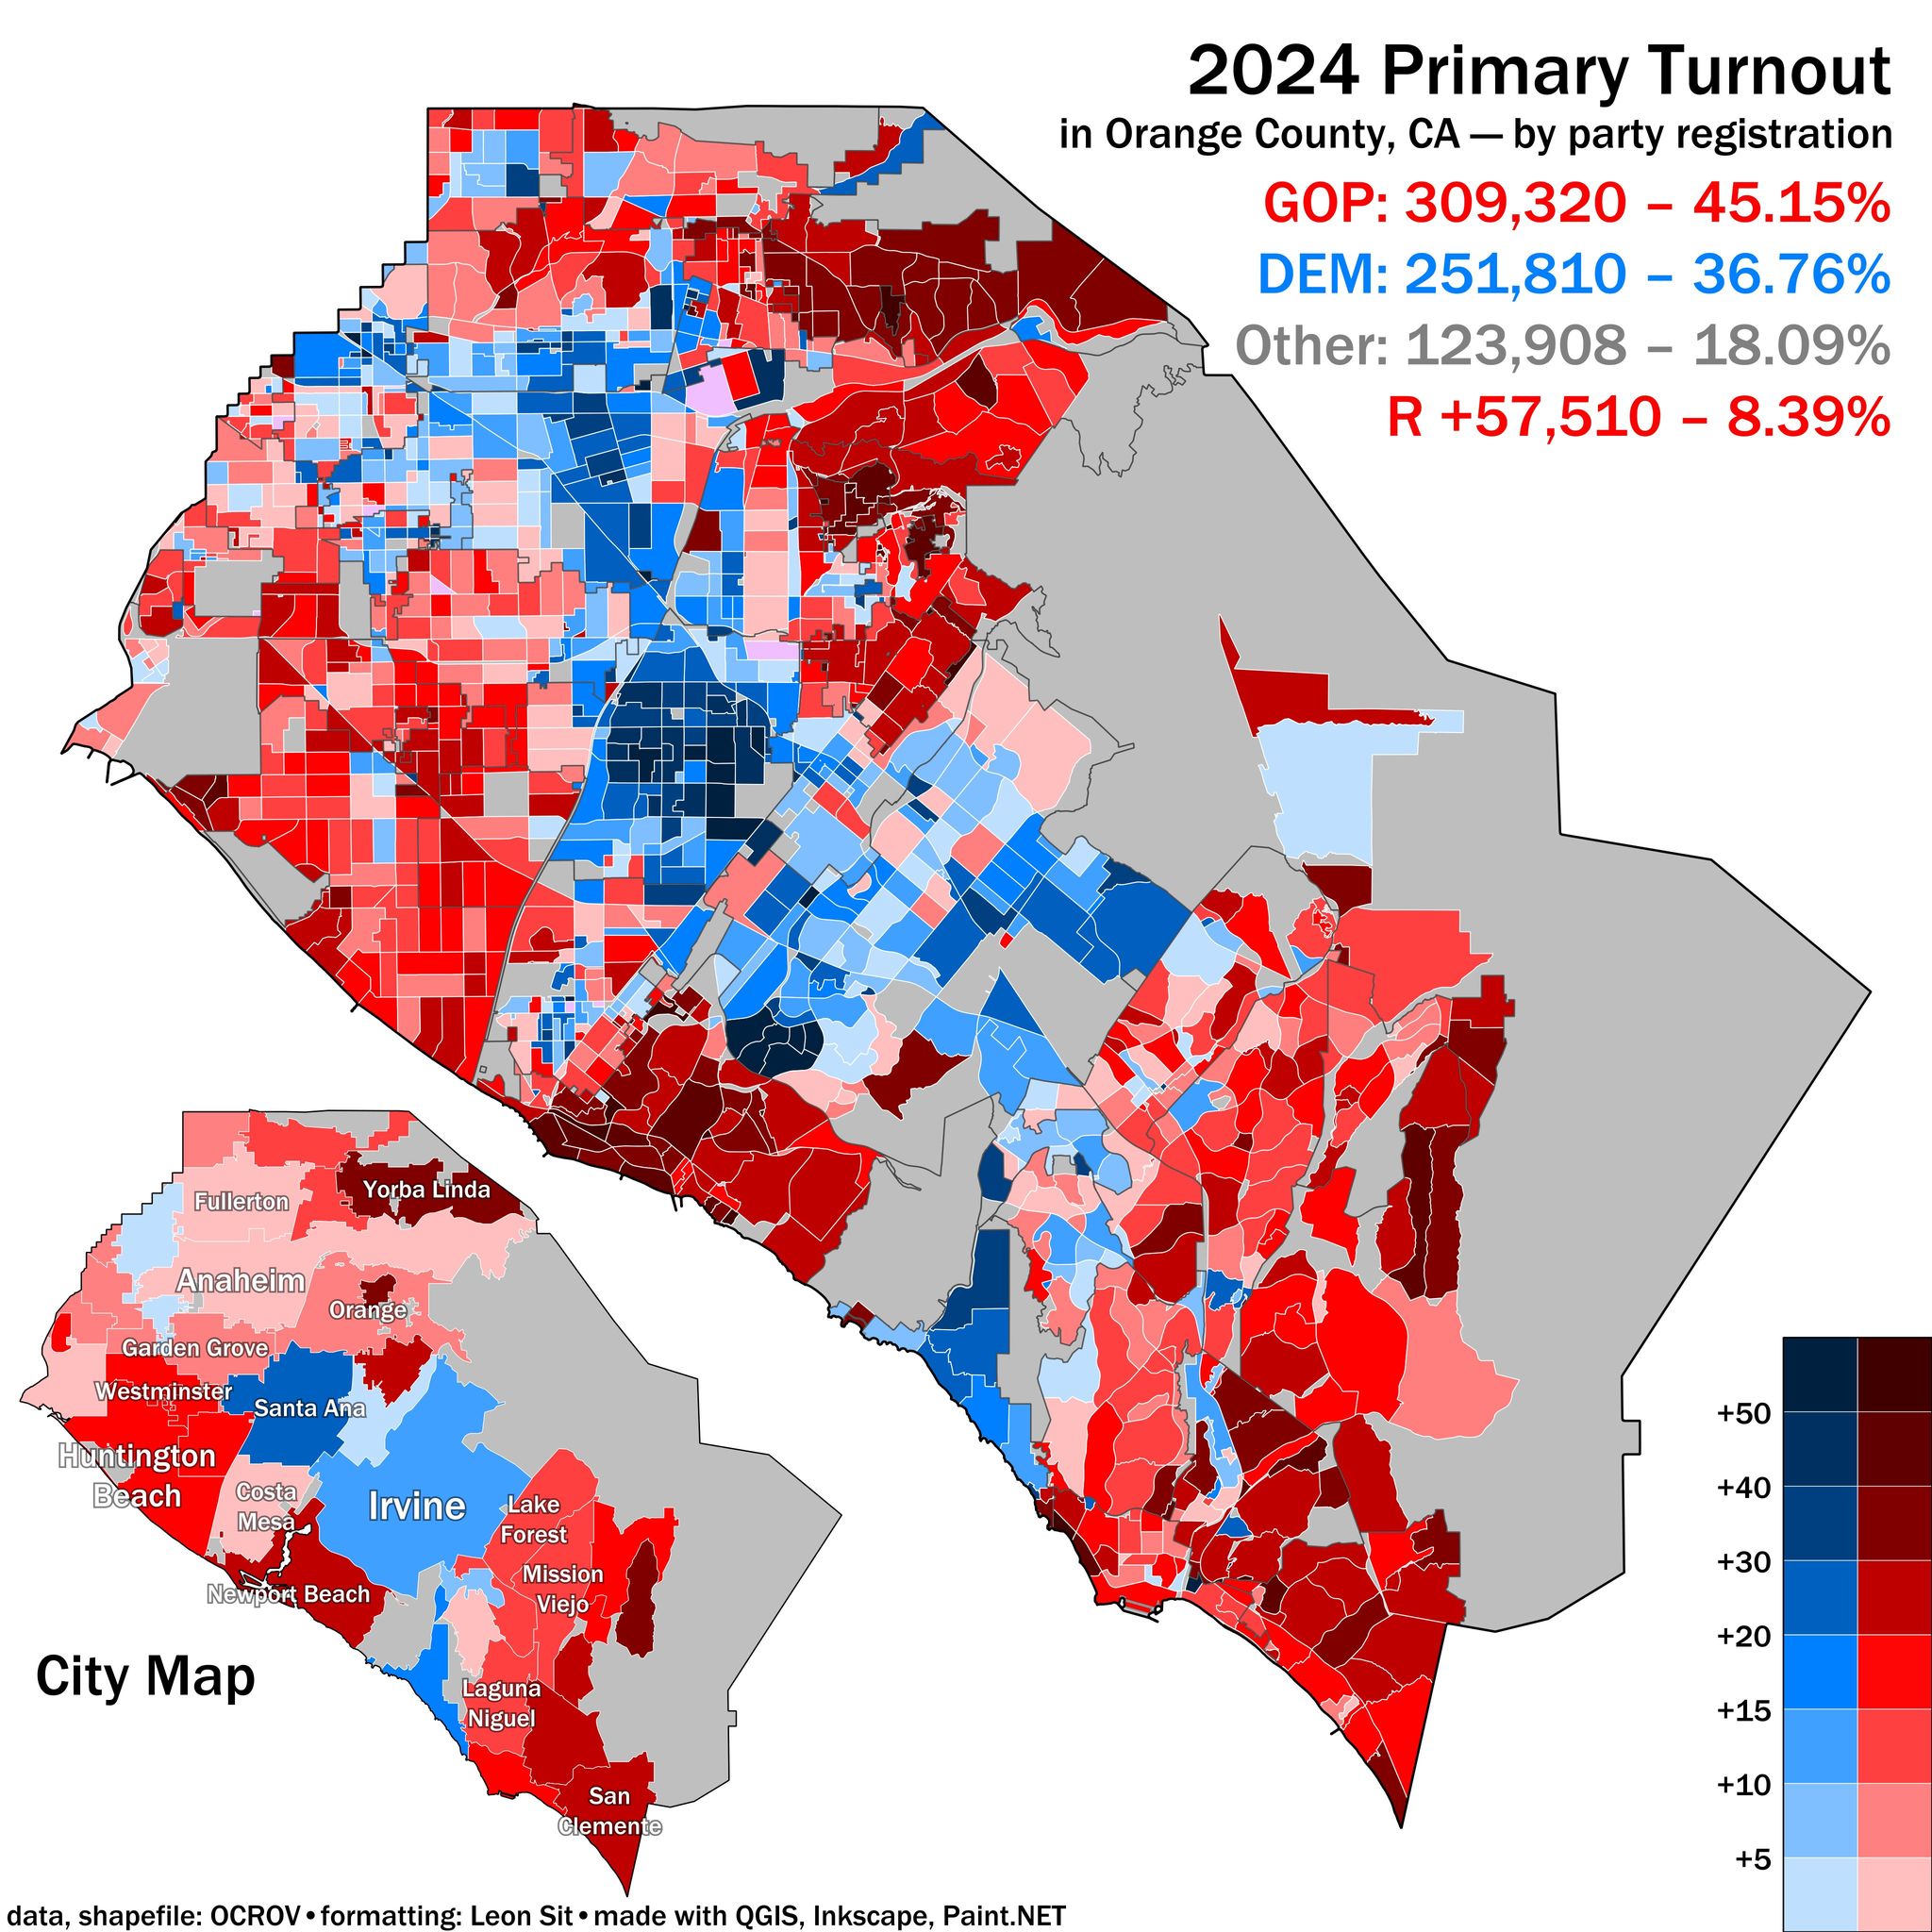 Orange County, 2024 Primary Turnout vs. Party Registration